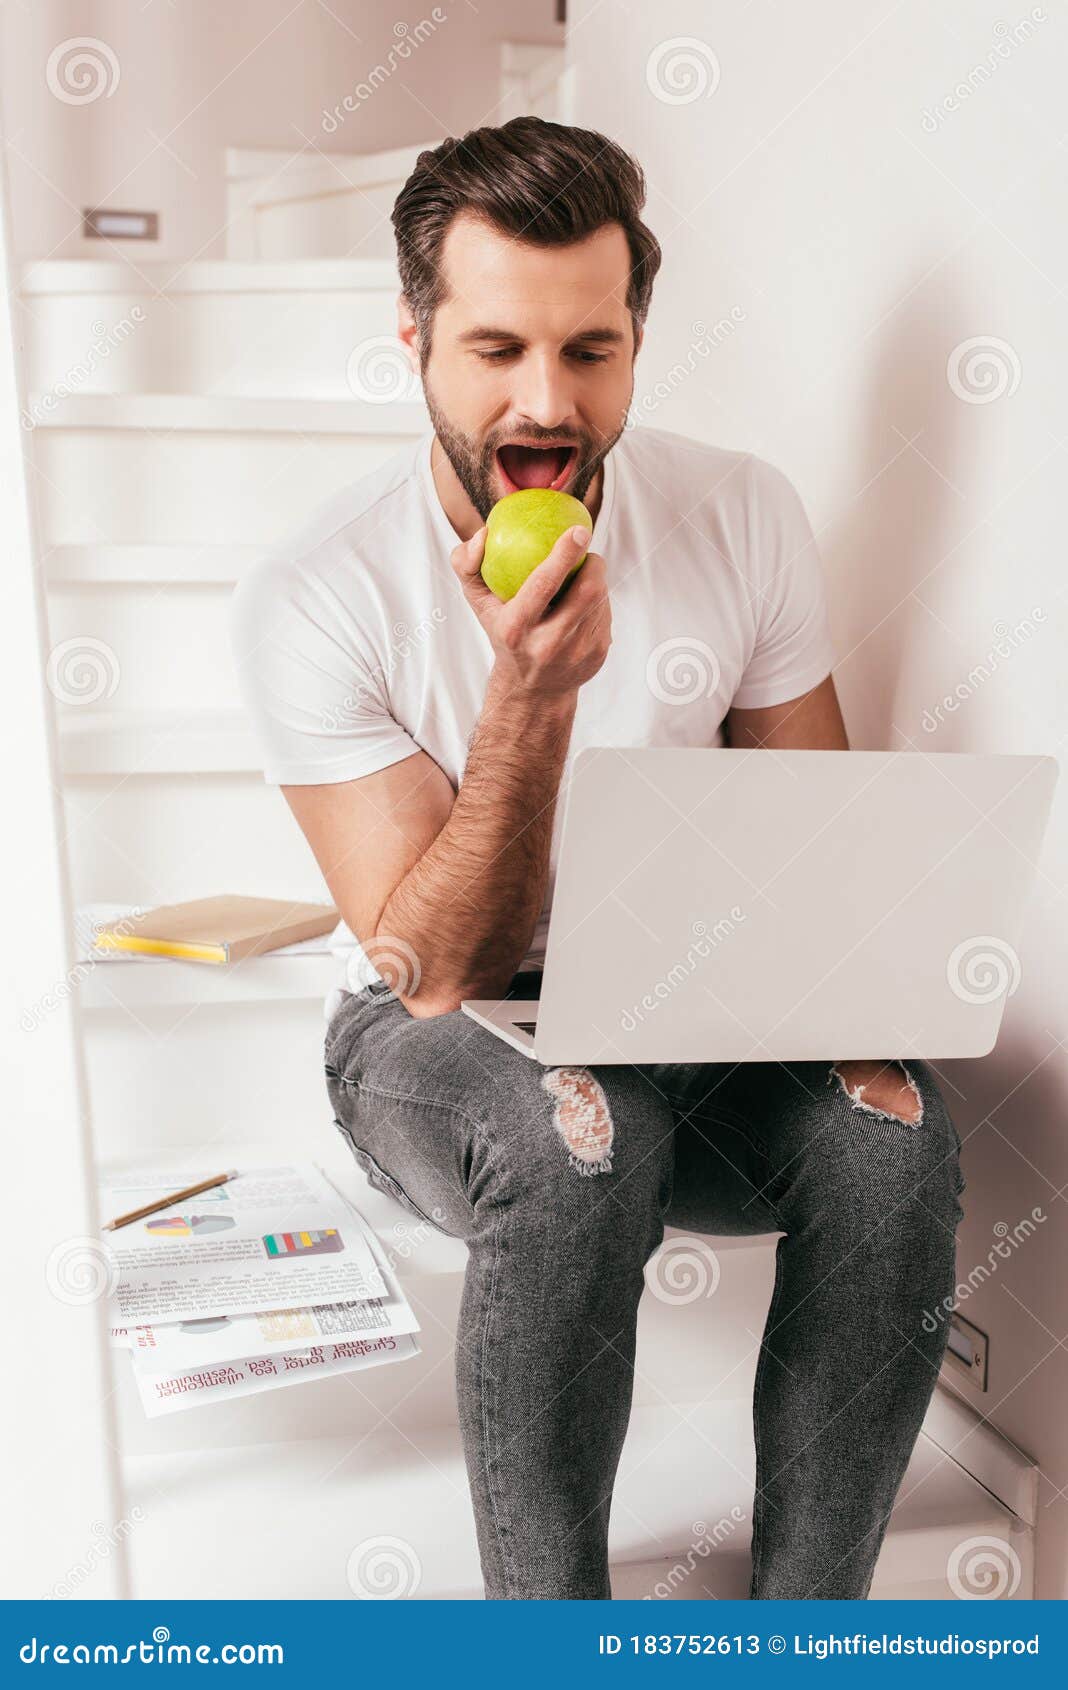 handsome teleworker eating apple while working